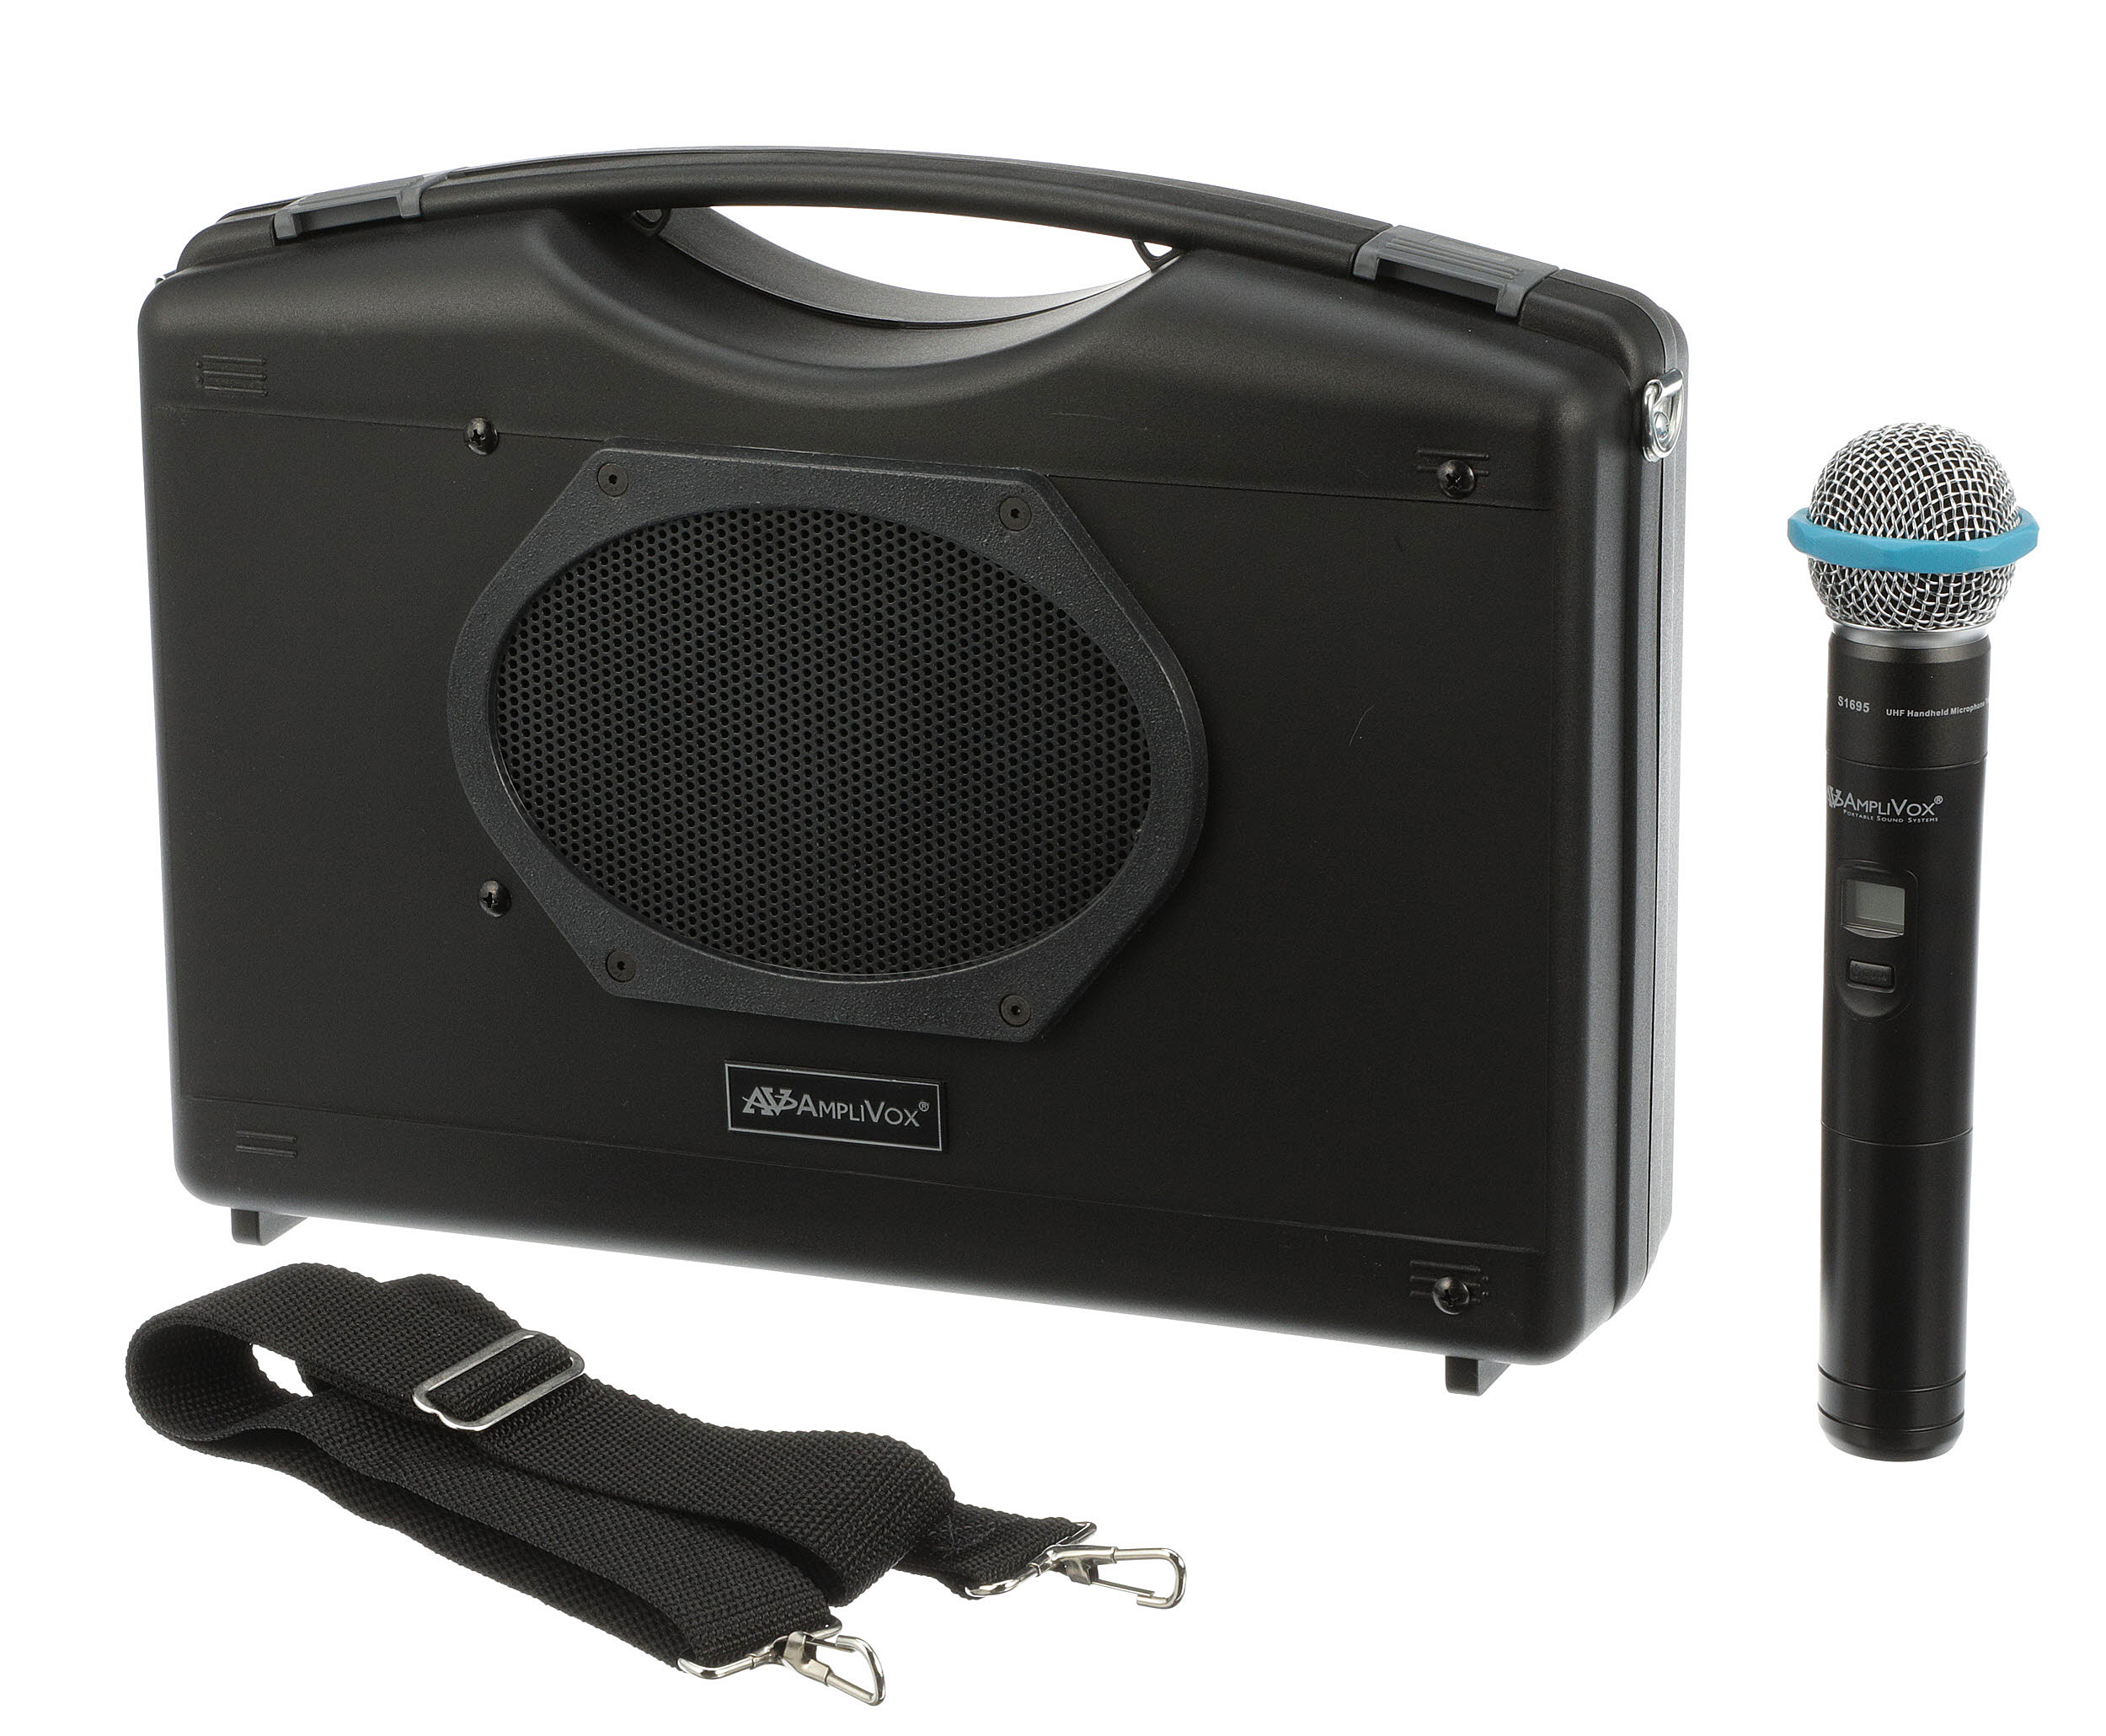 AmpliVox Sound Systems offers a complete line of high-quality, megaphones, horn-style hailers, and portable PA systems that can reach audiences from 10 to 7,500, indoors or out, or dispersed people currently separated by “social distancing”.